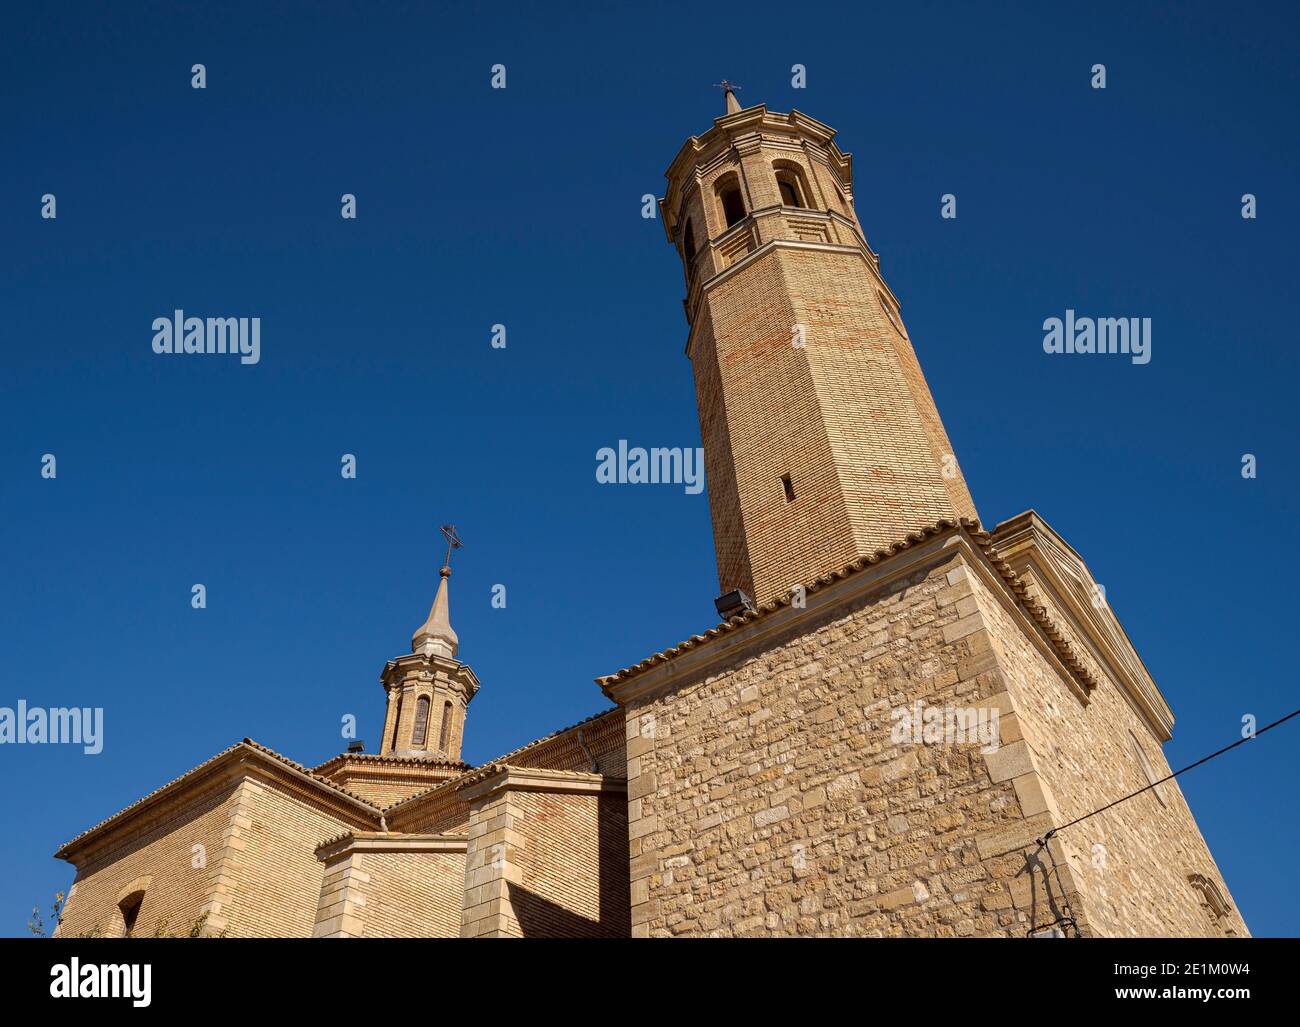 Church of Our Lady of the Assumption, in the village of Fuendetodos, province of Zaragoza, Spain. It was built in the 18th century Stock Photo